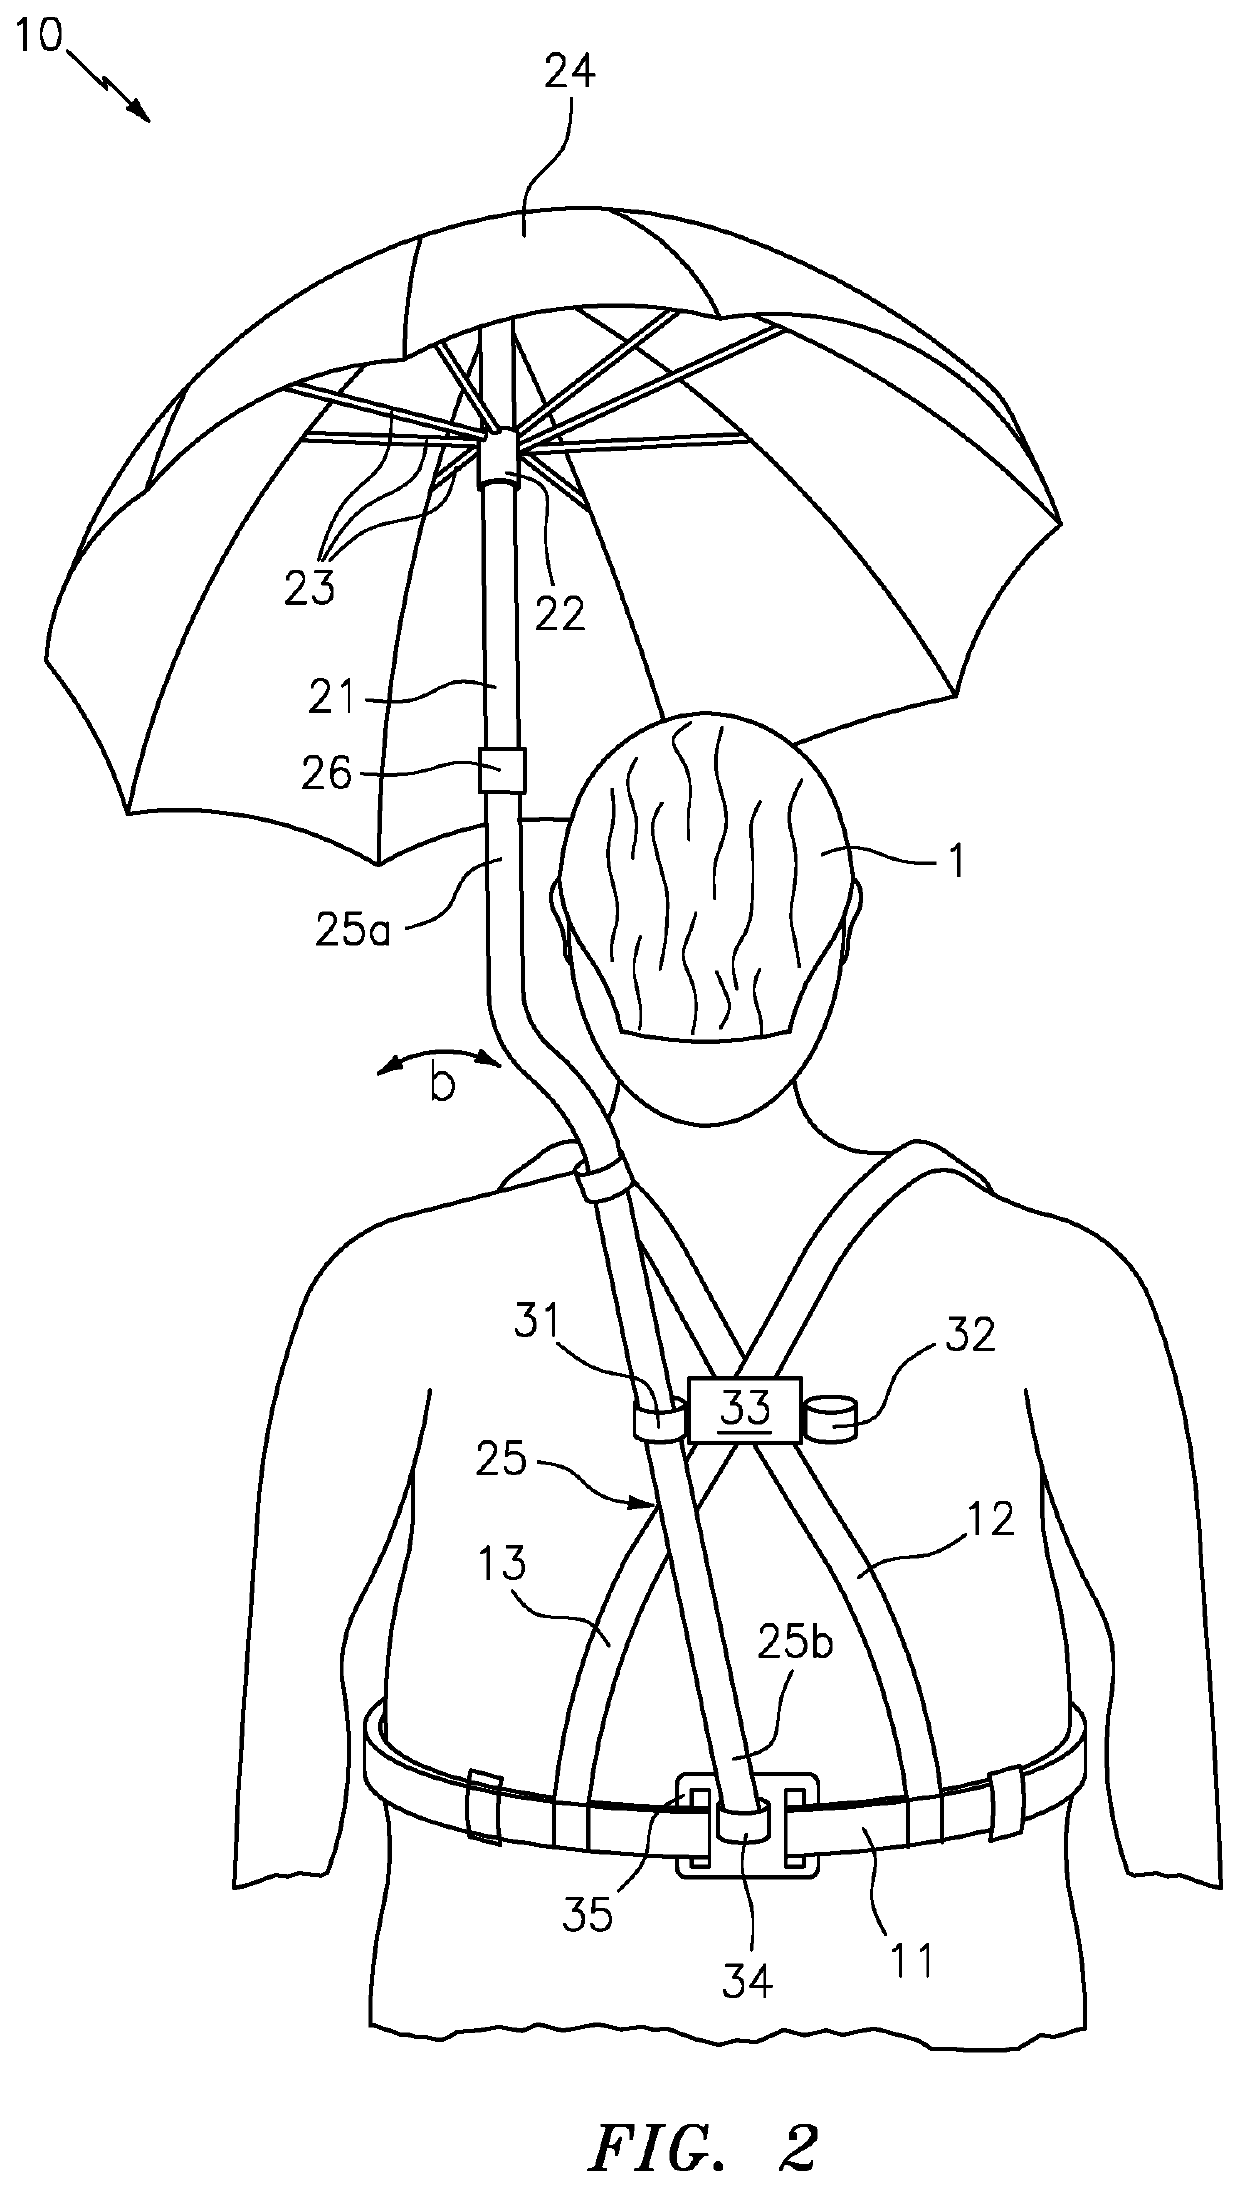 High visibility vest with hands free umbrella device